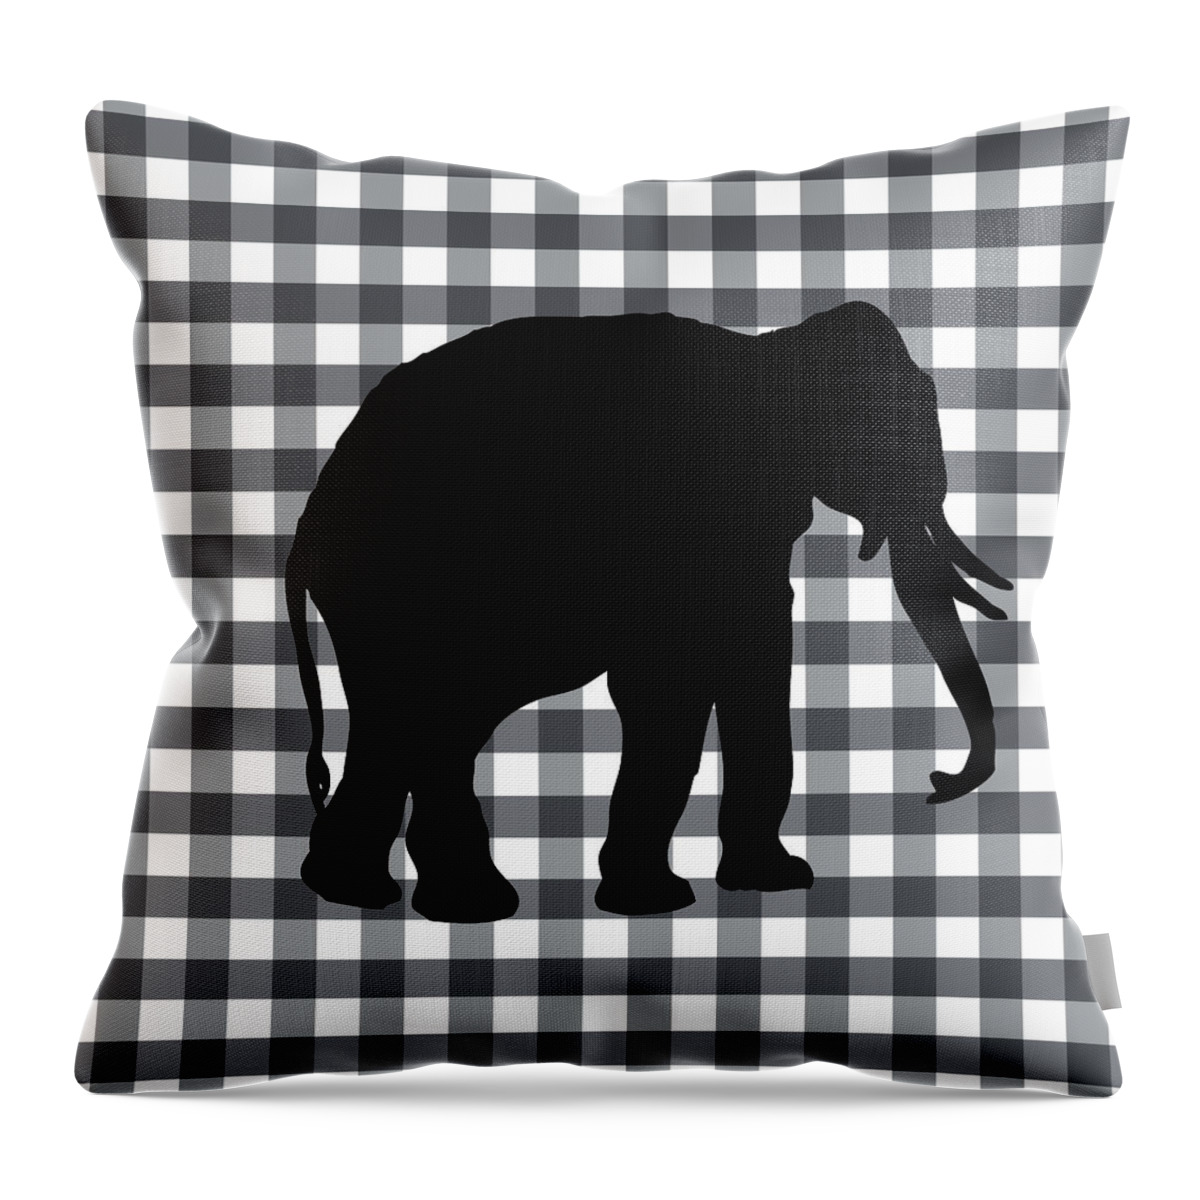 Elephant Throw Pillow featuring the digital art Elephant Silhouette by Linda Woods